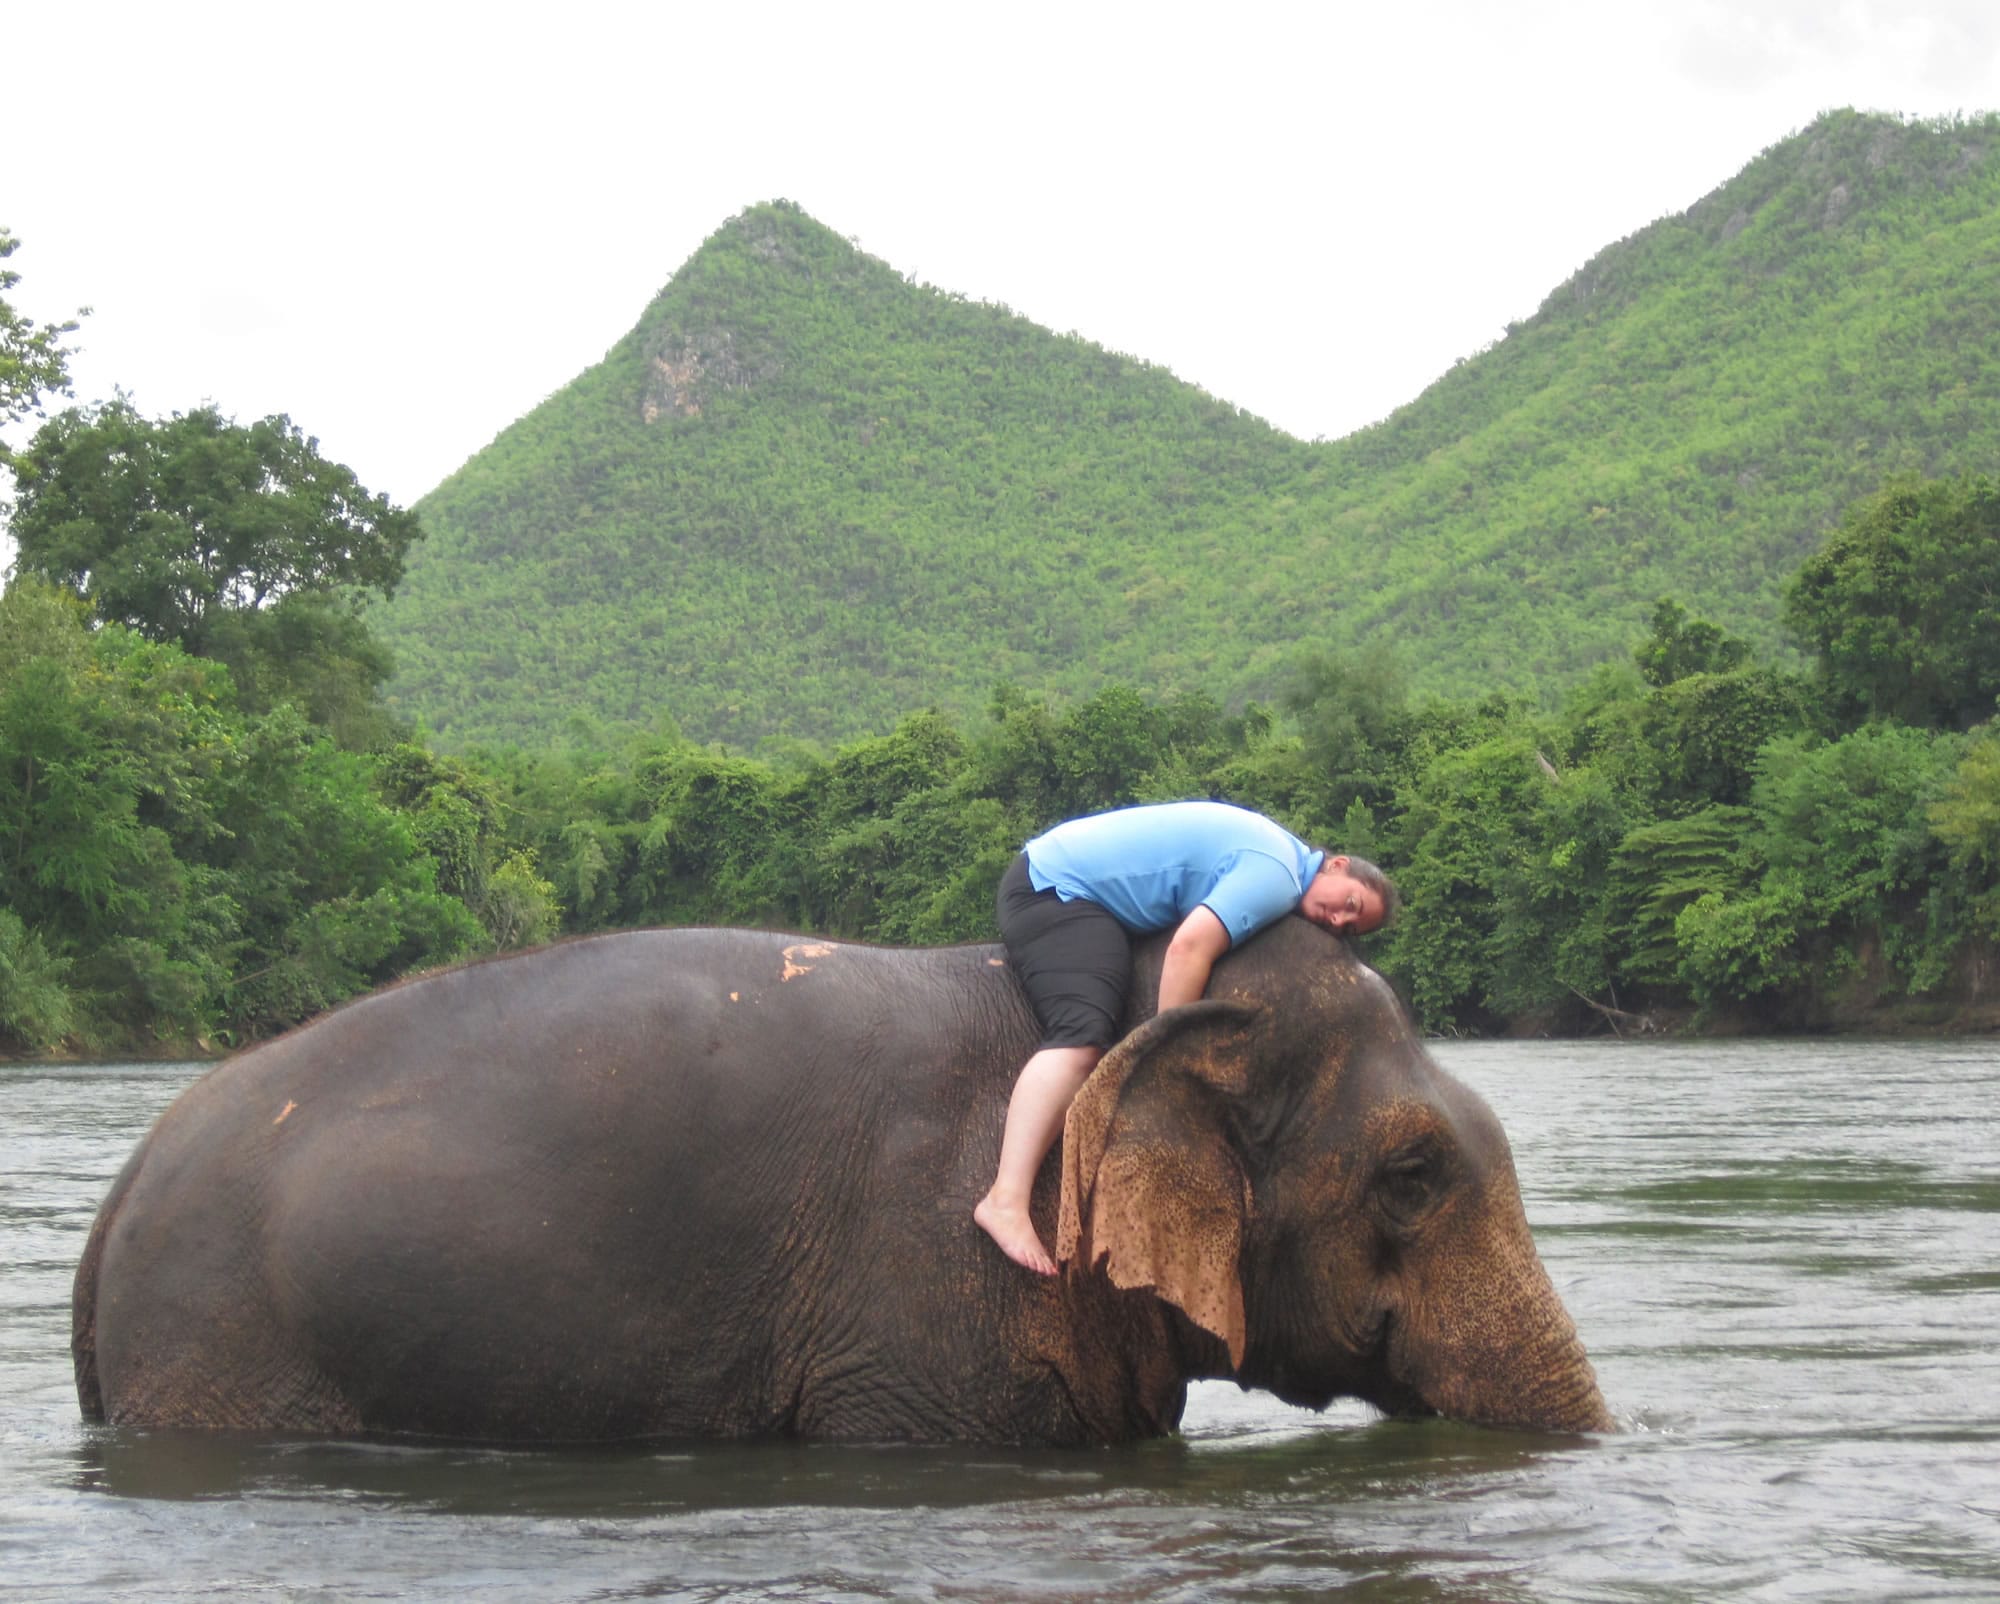 Crystal Steinmueller rests atop an elephant as it bathes.